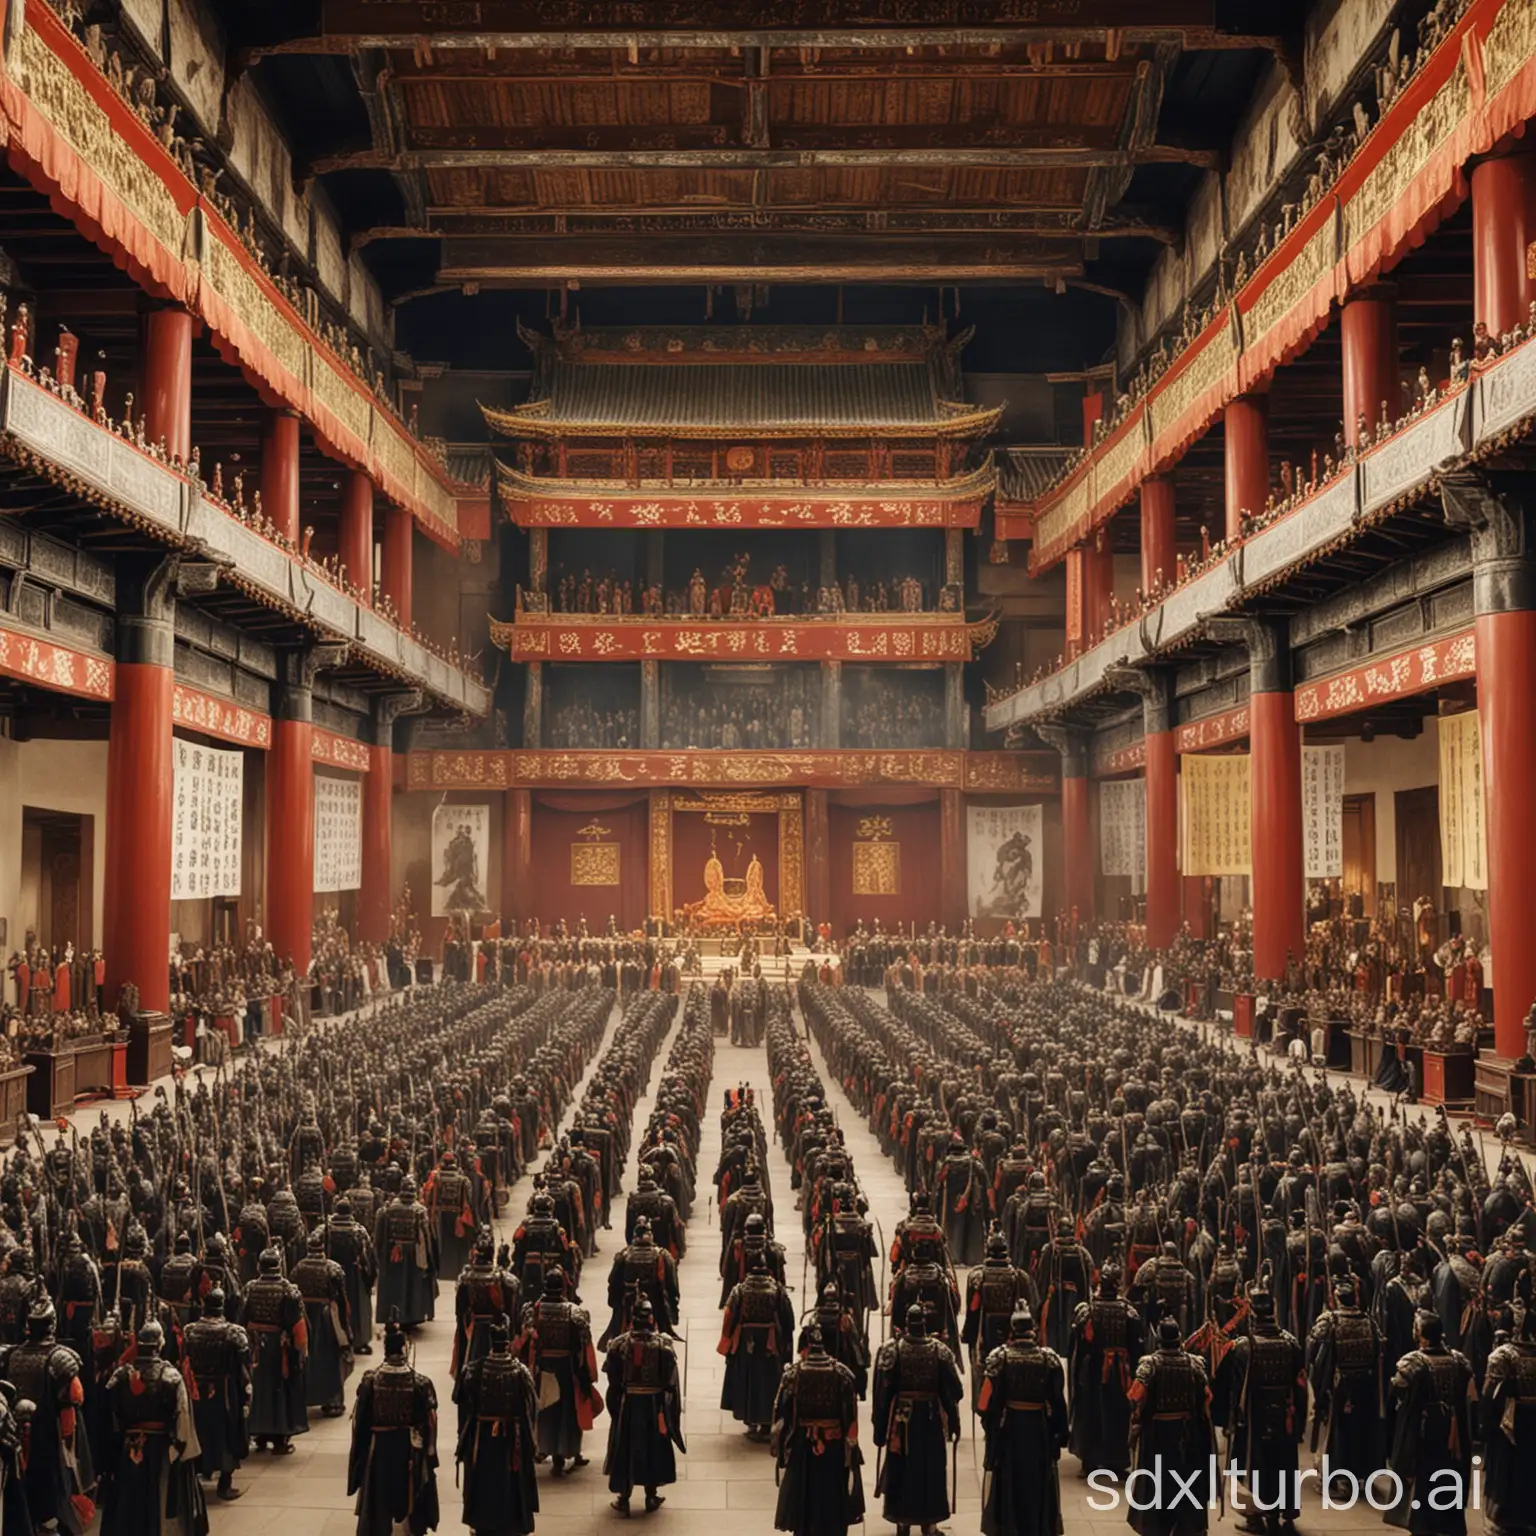 Magnificent-Main-Hall-of-Three-Kingdoms-with-Solemn-Cao-Cao-and-Officials